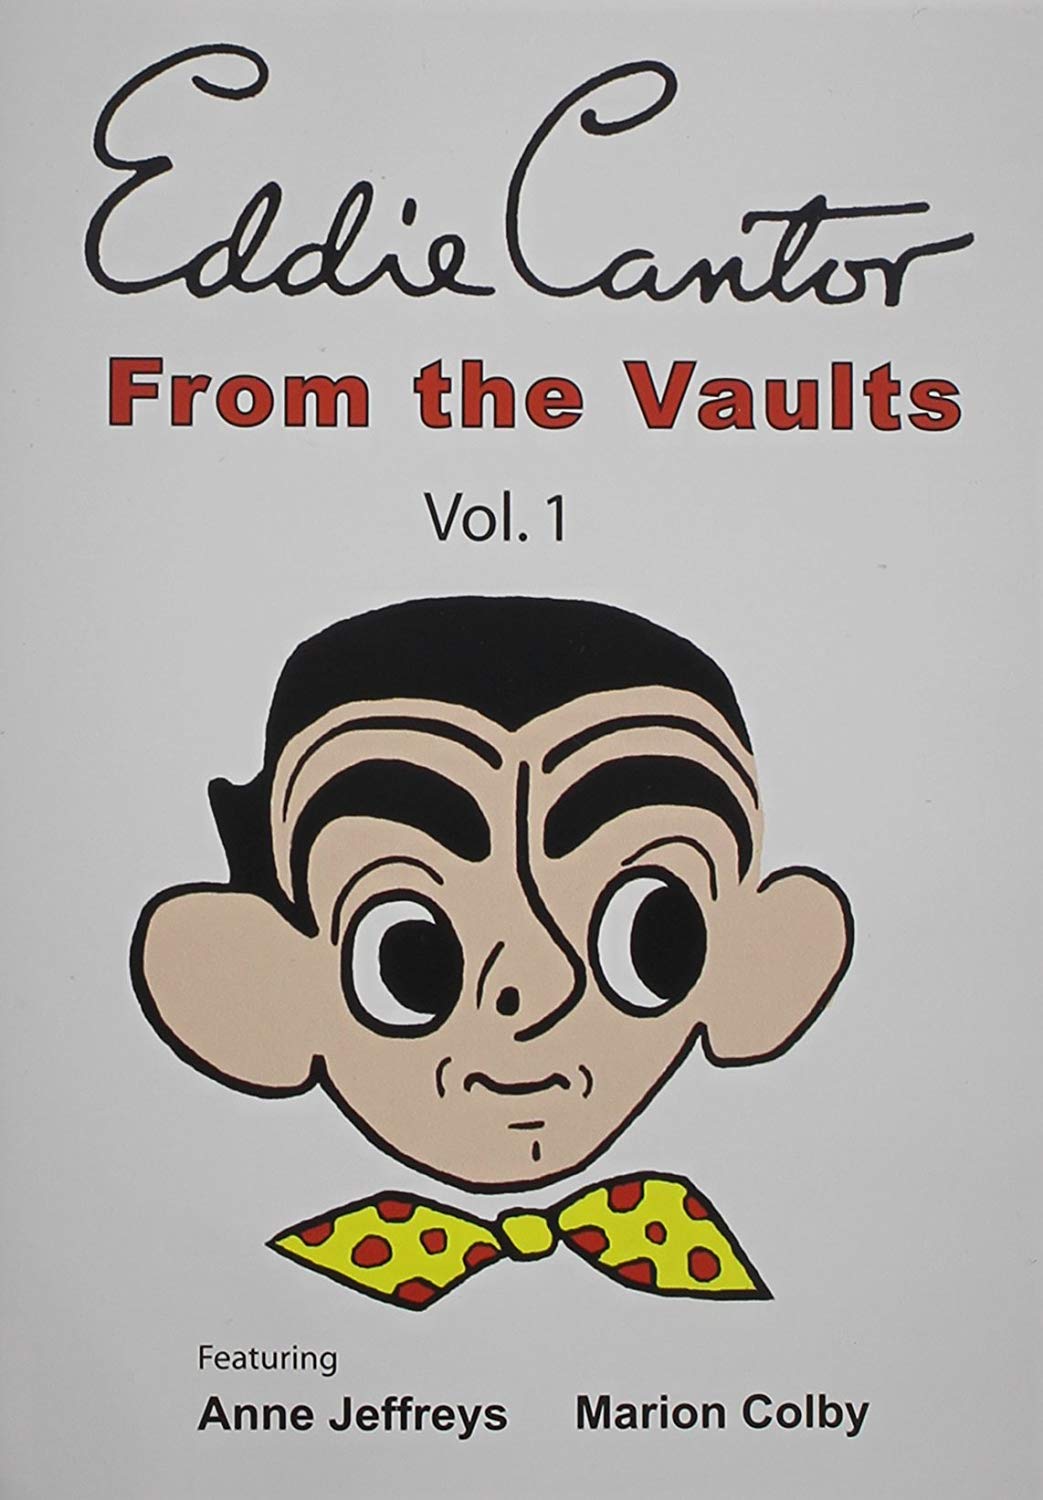 Eddie Cantor, Volume 1: From The Vaults